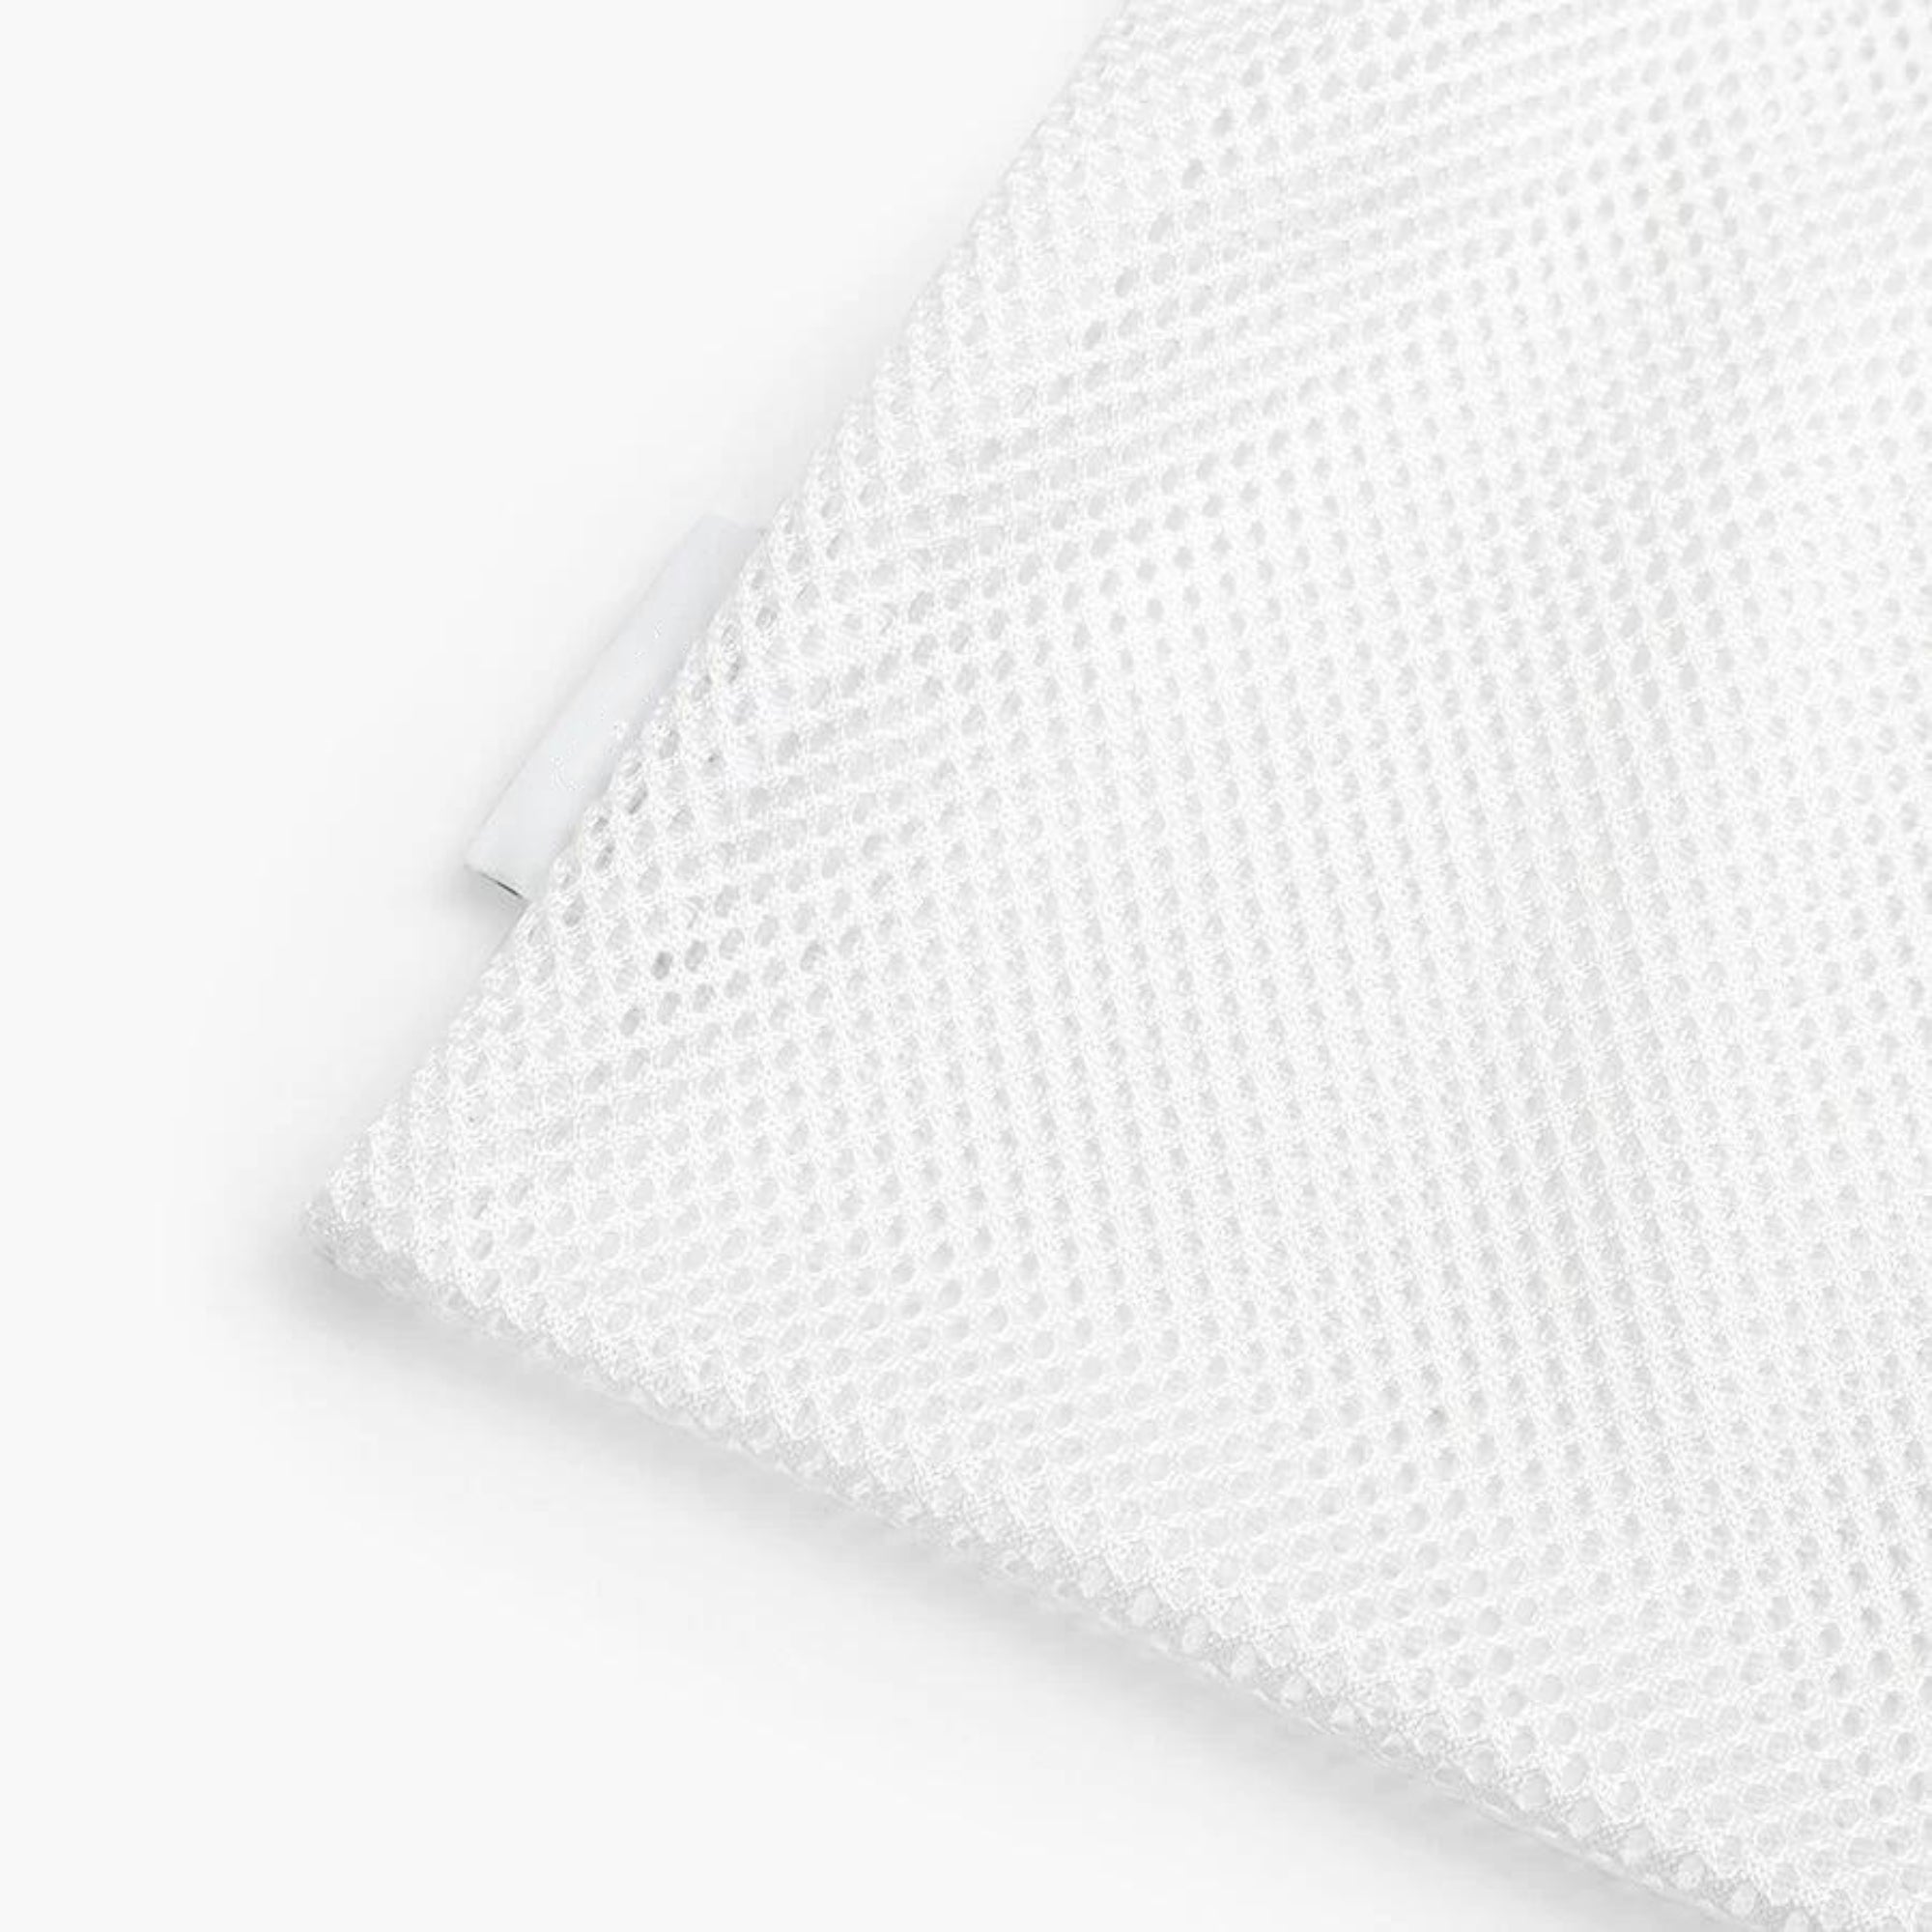 An image of a white mesh washing bag in white background